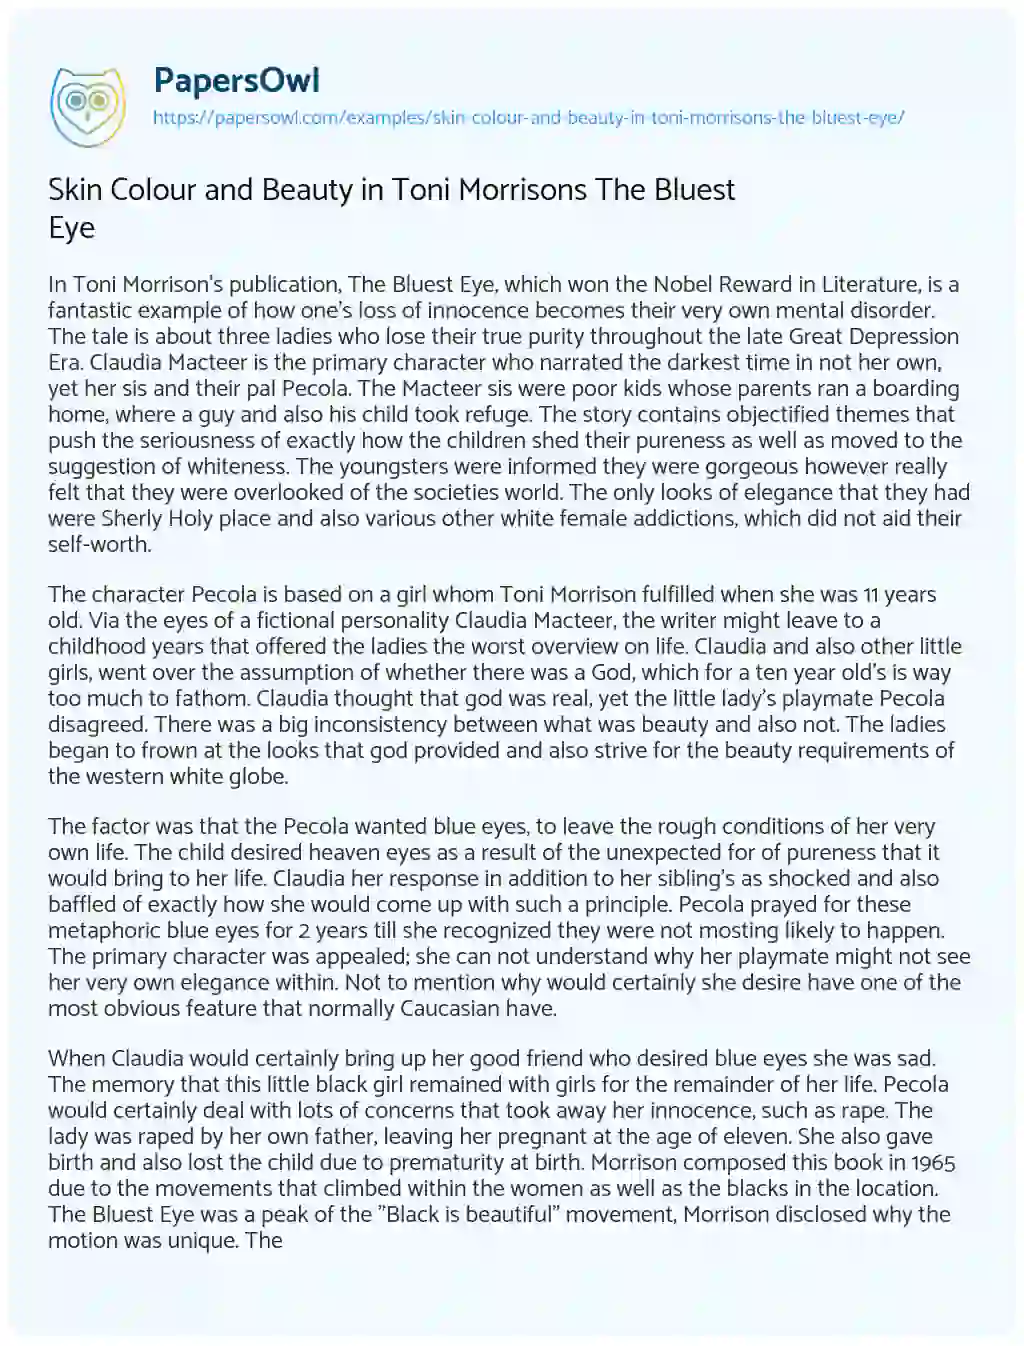 Essay on Skin Colour and Beauty in Toni Morrisons the Bluest Eye